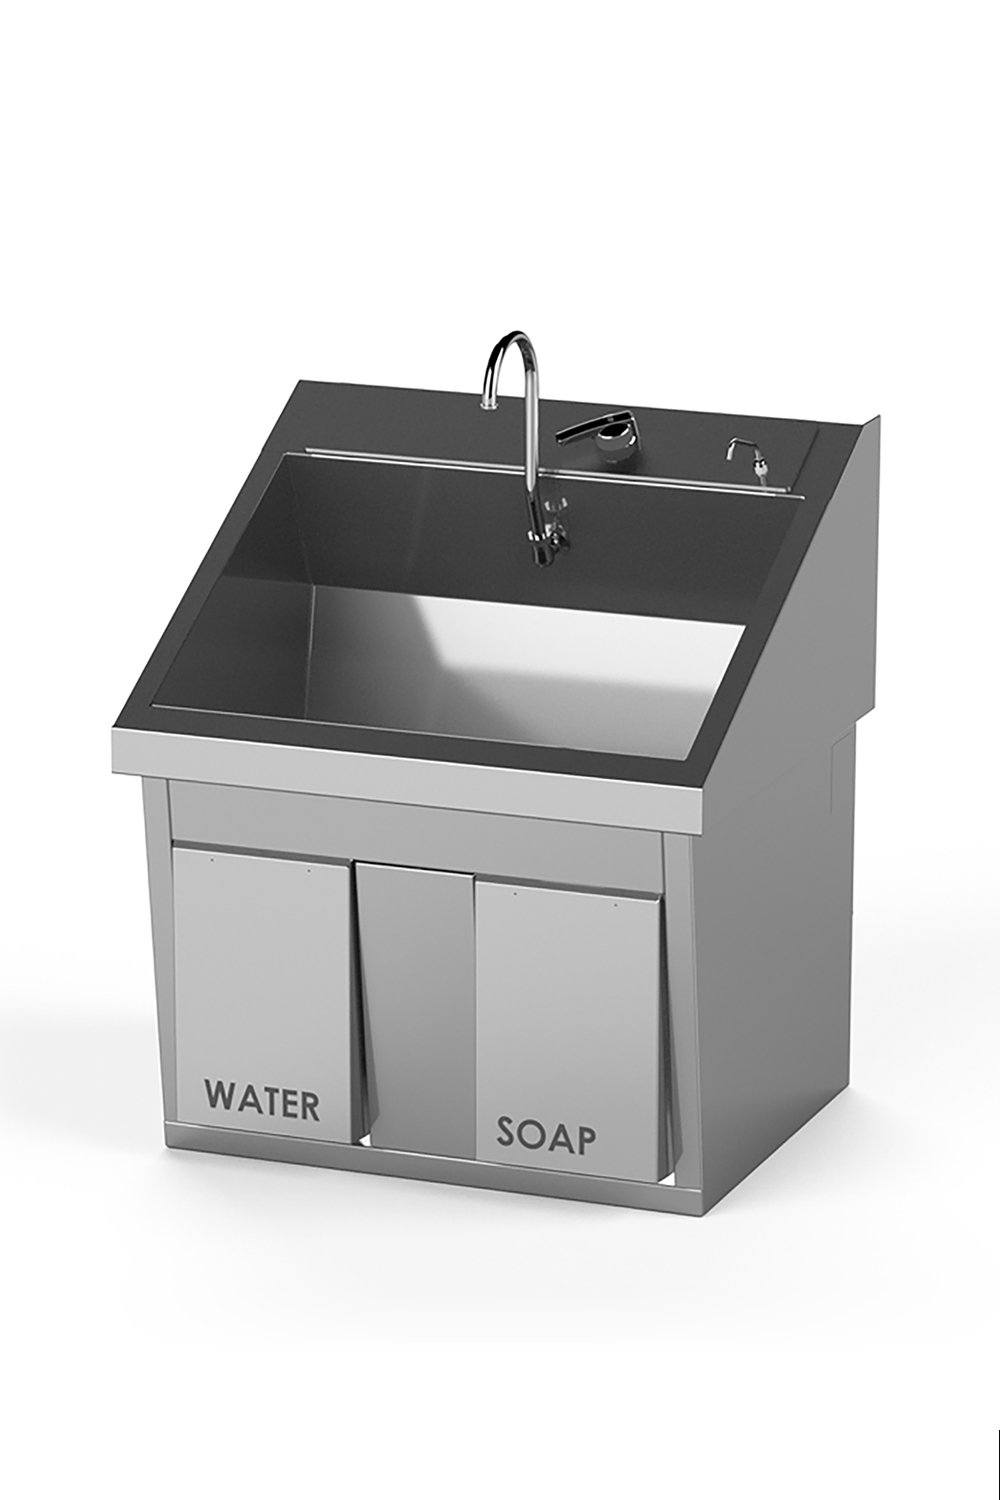 Scrub Sink Stainless Solutions Macmedical 